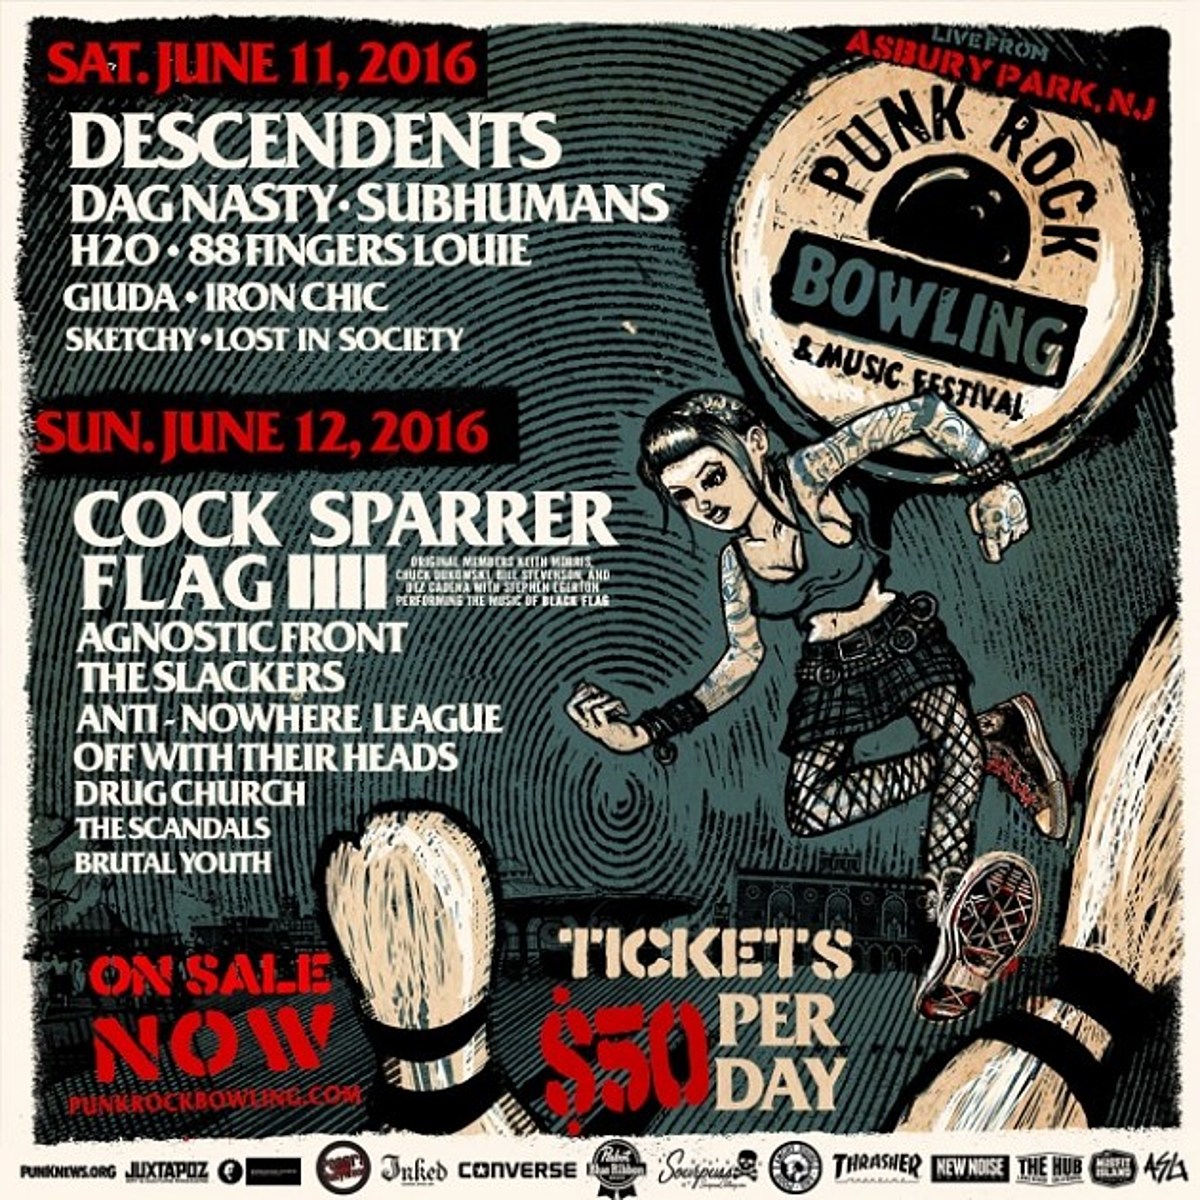 Punk Rock Bowling NJ announces night shows (The Bronx, The Falcon, The